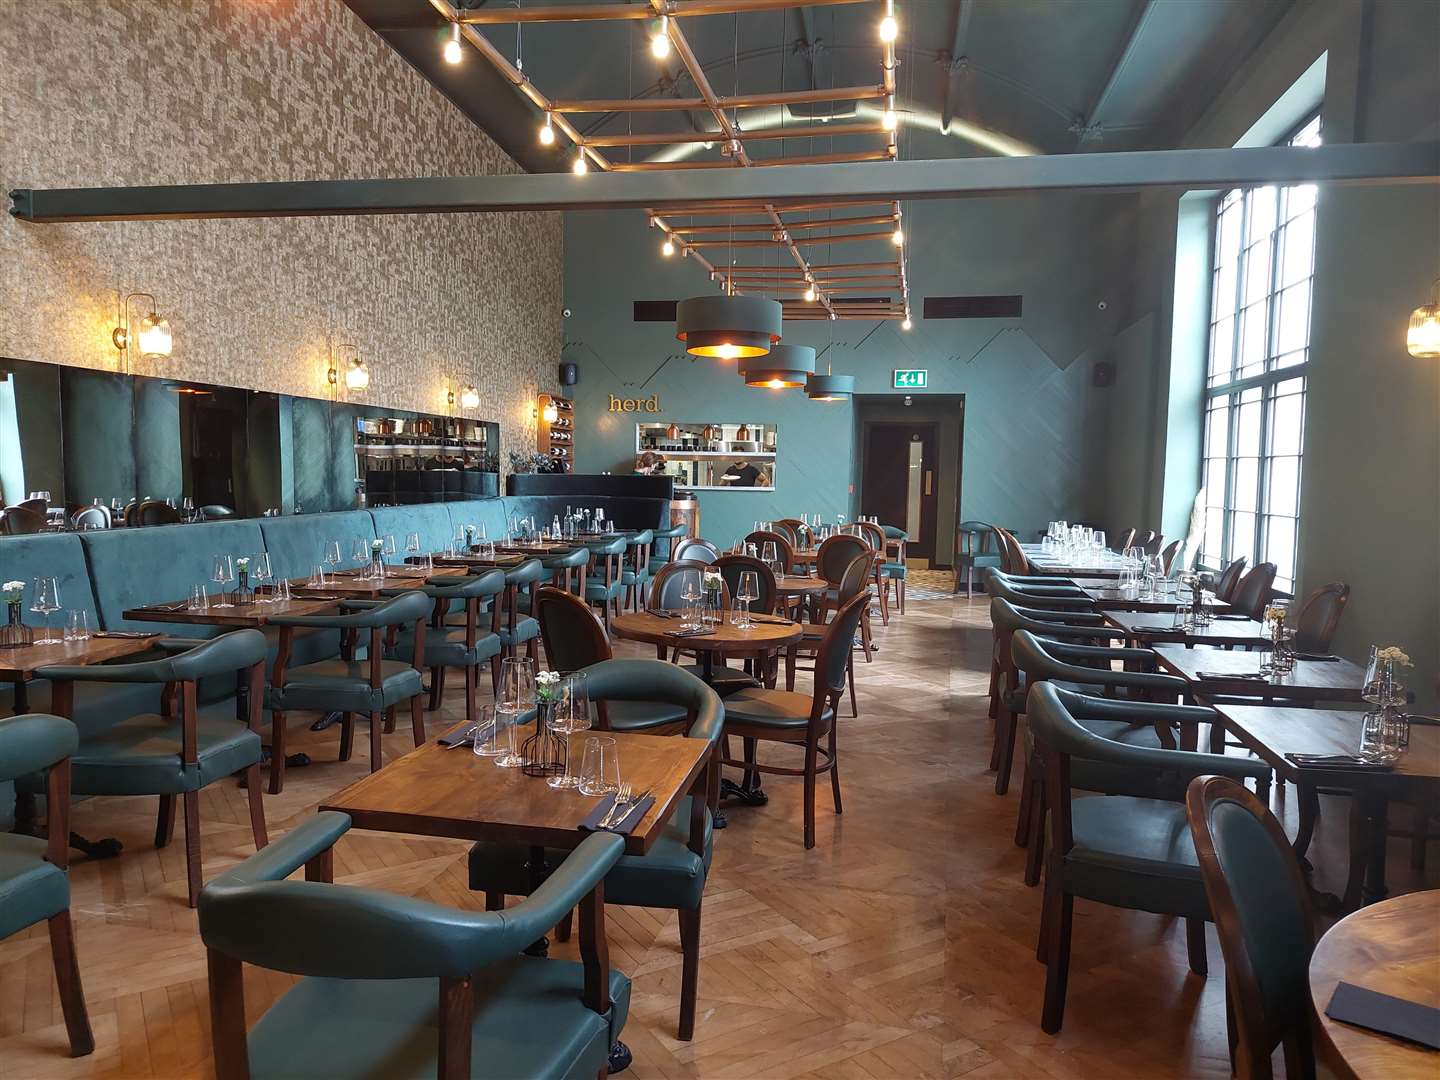 The restaurant feels spacious and well laid-out